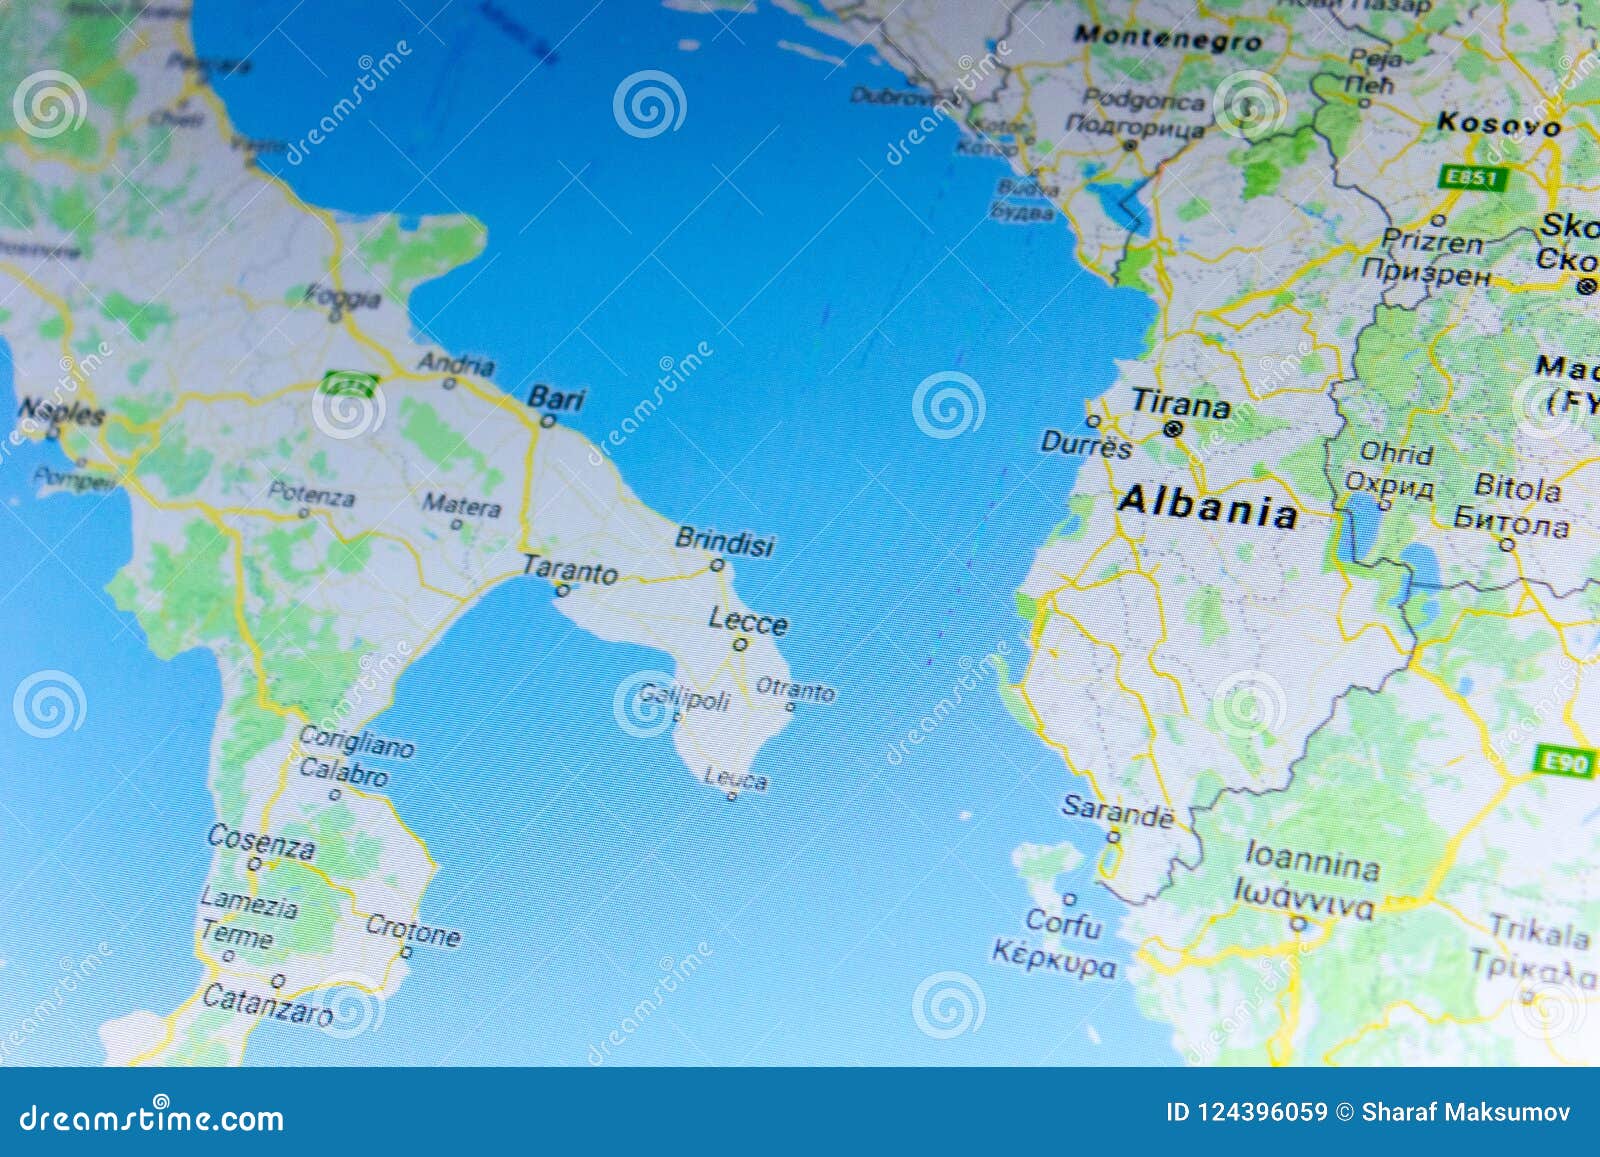 Ryazan, Russia - July 08, 2018: Country of Albania on the Google Maps